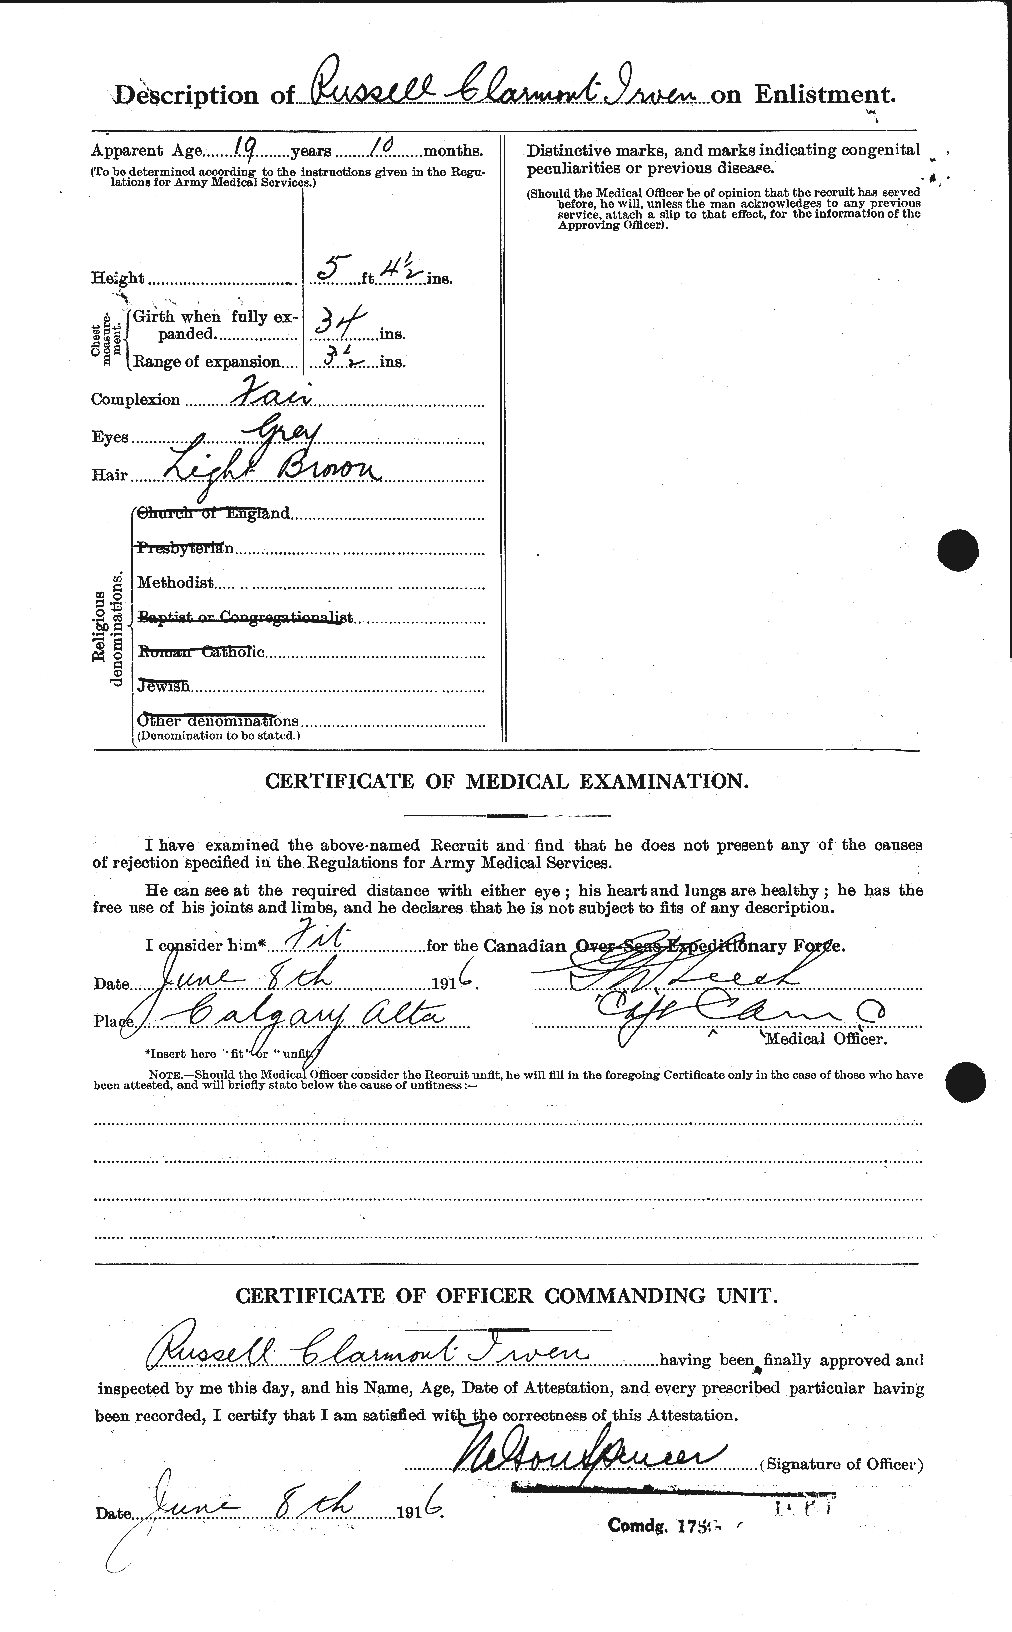 Personnel Records of the First World War - CEF 417168b